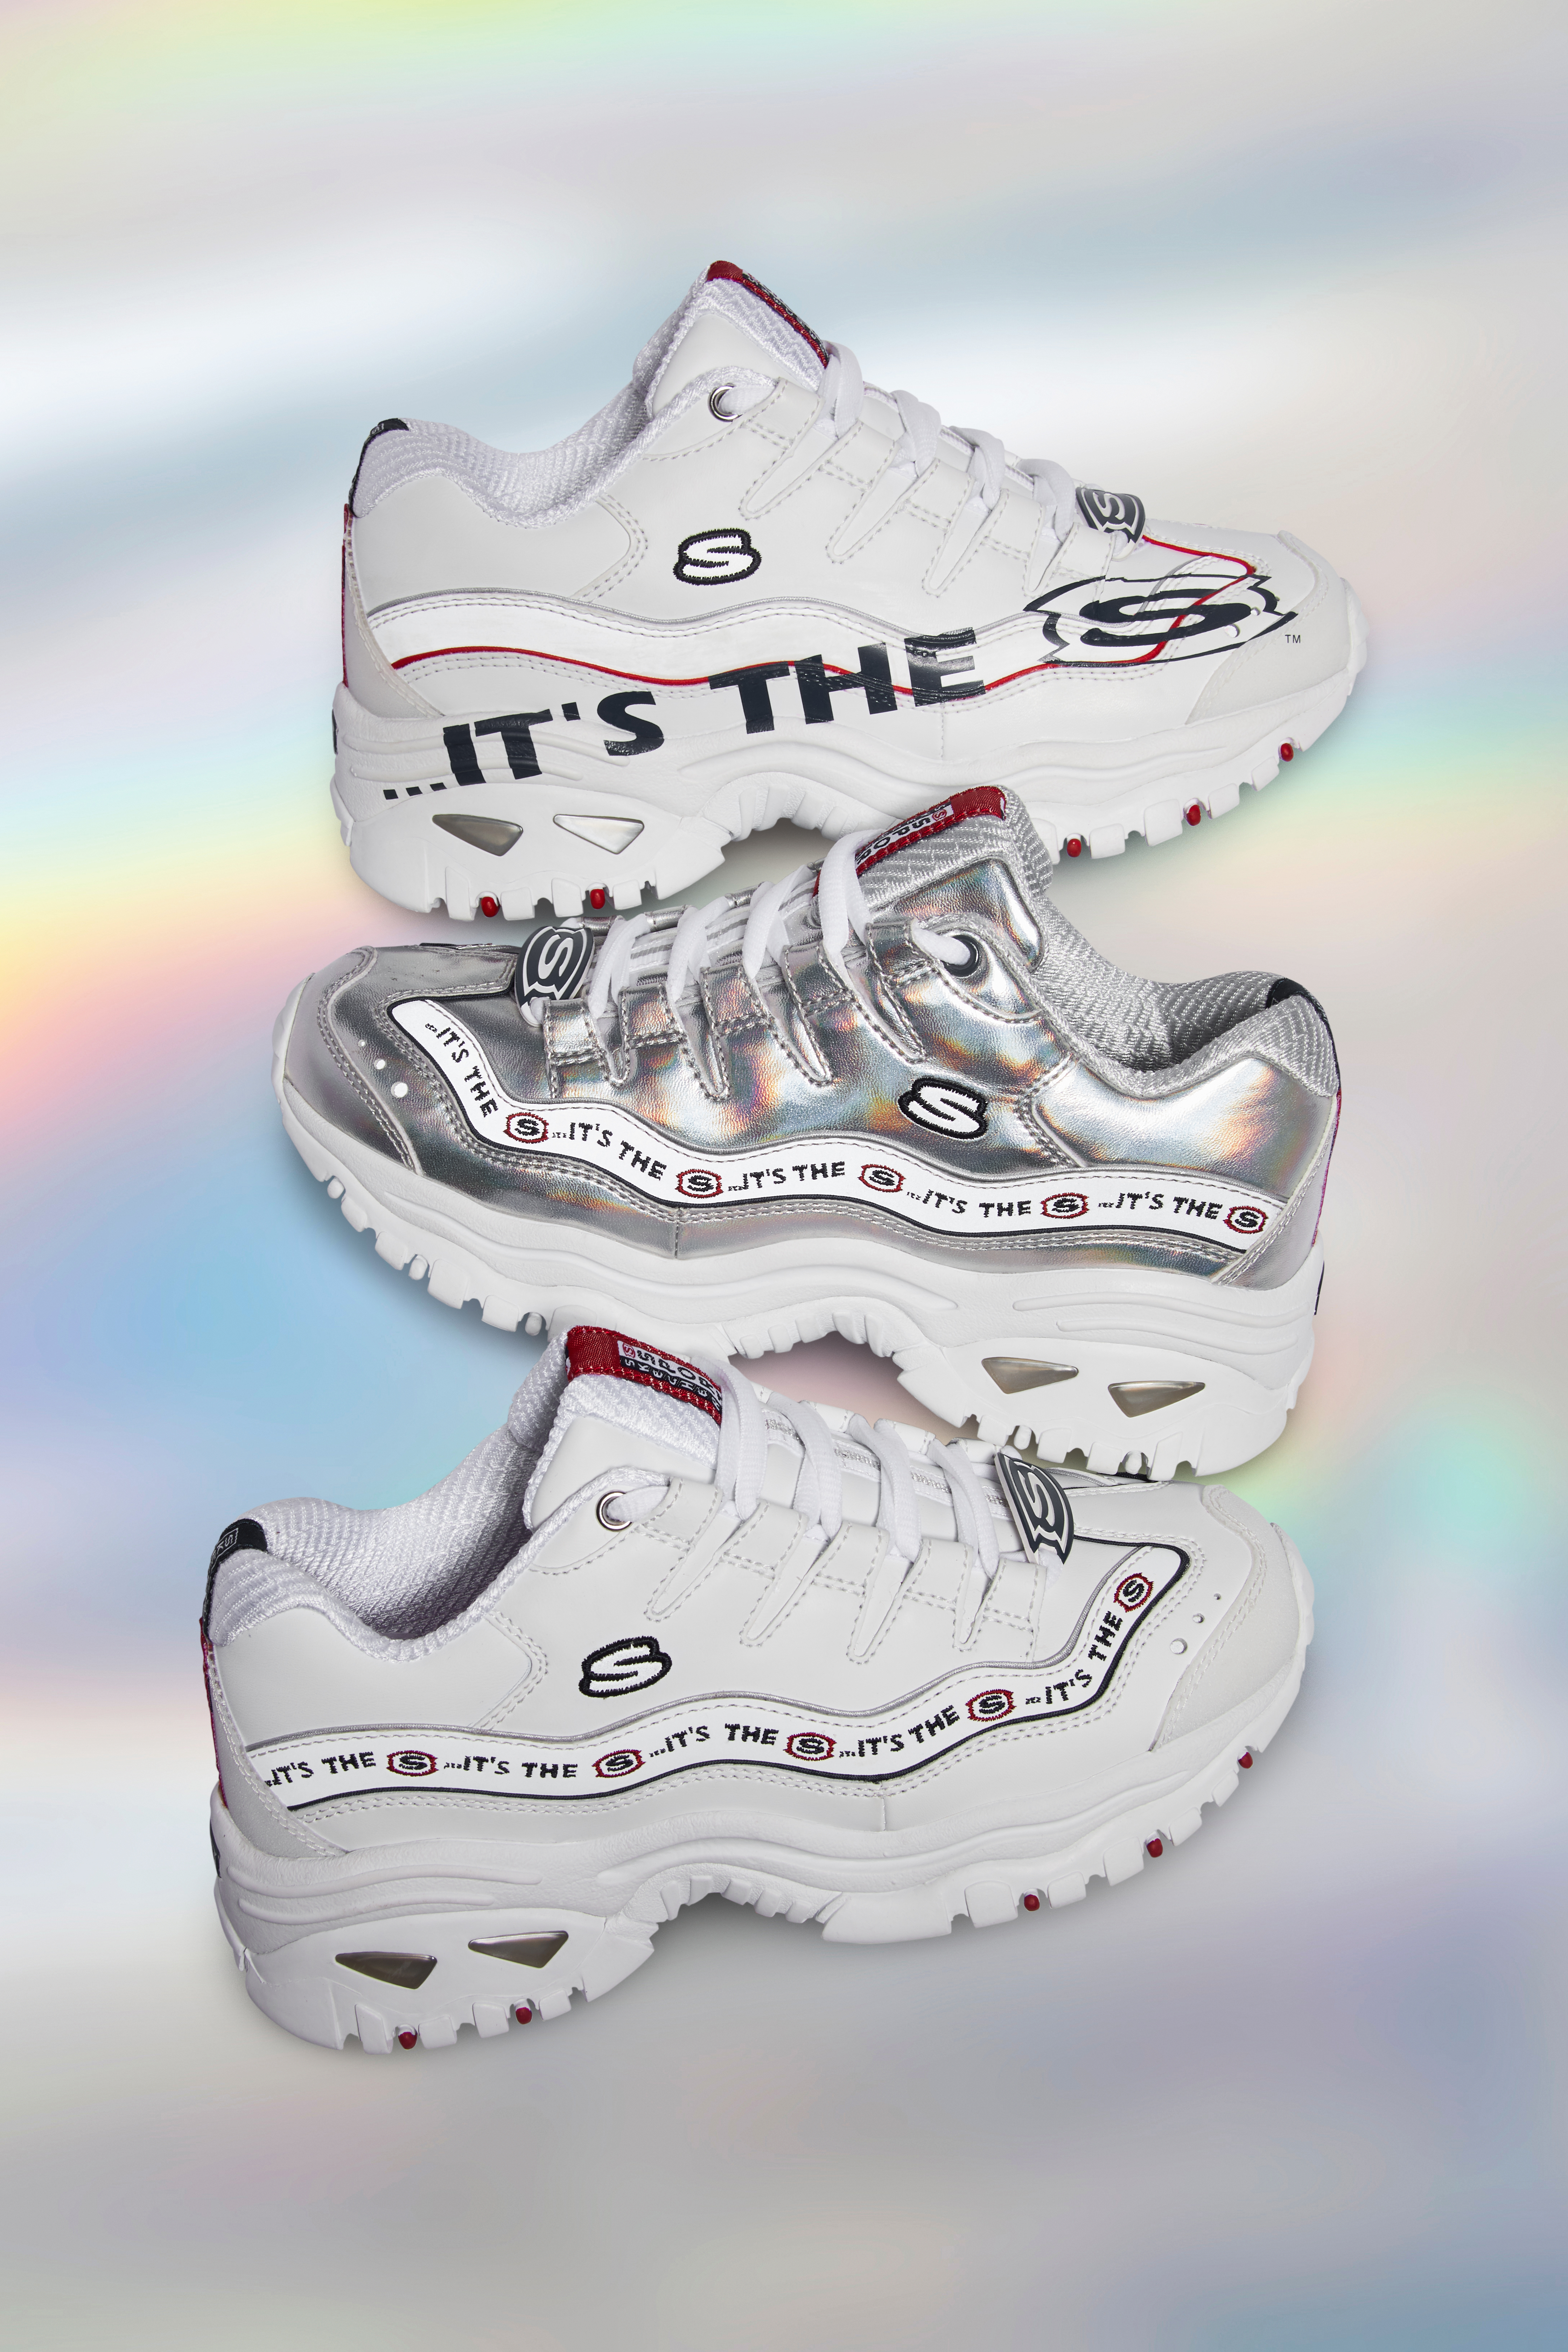 skechers new collection 2018